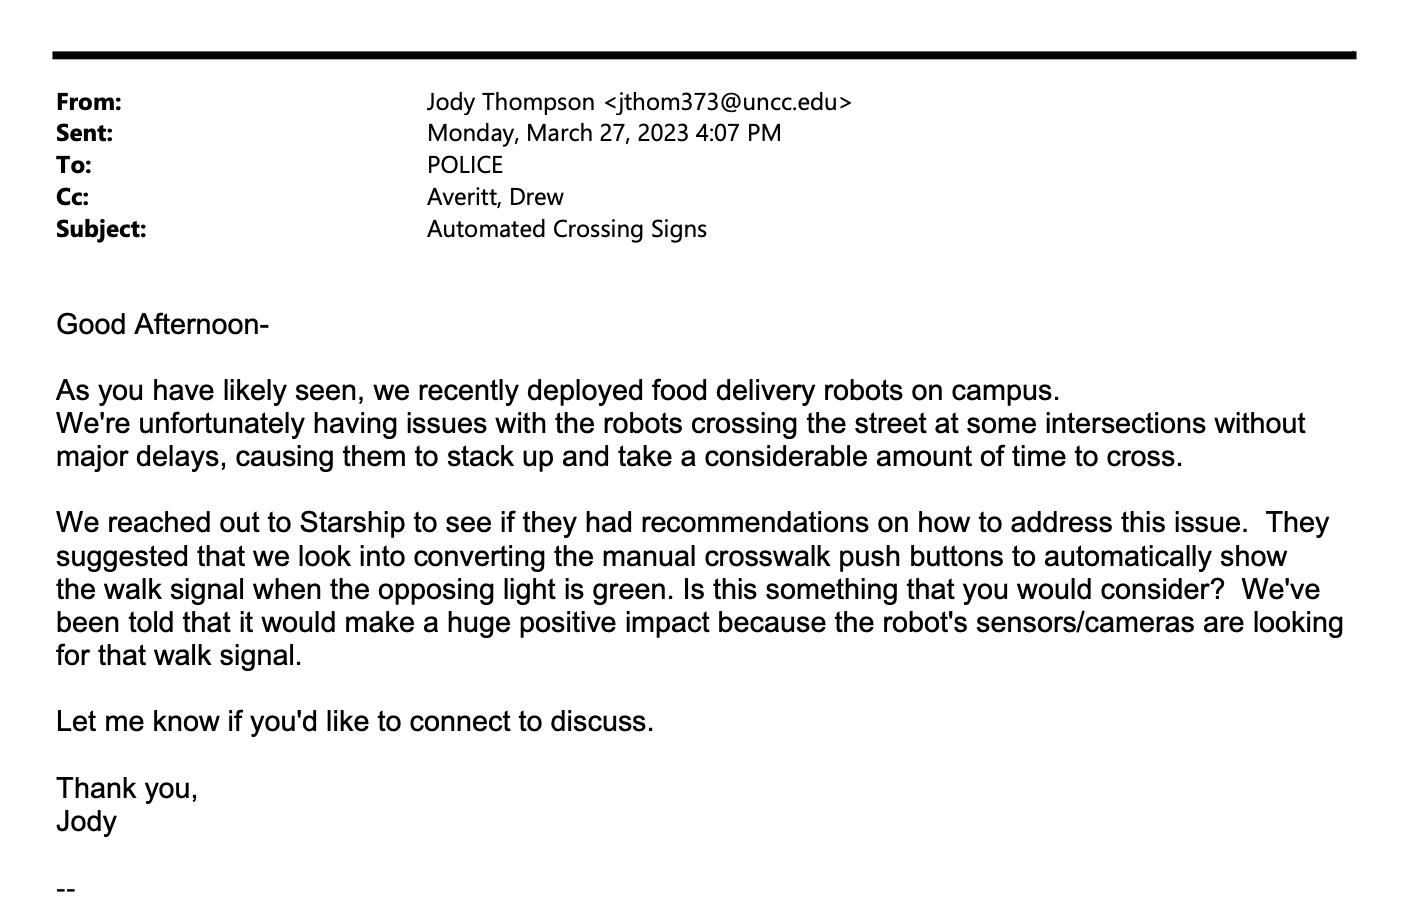 An email explaining the robots had trouble crossing the street